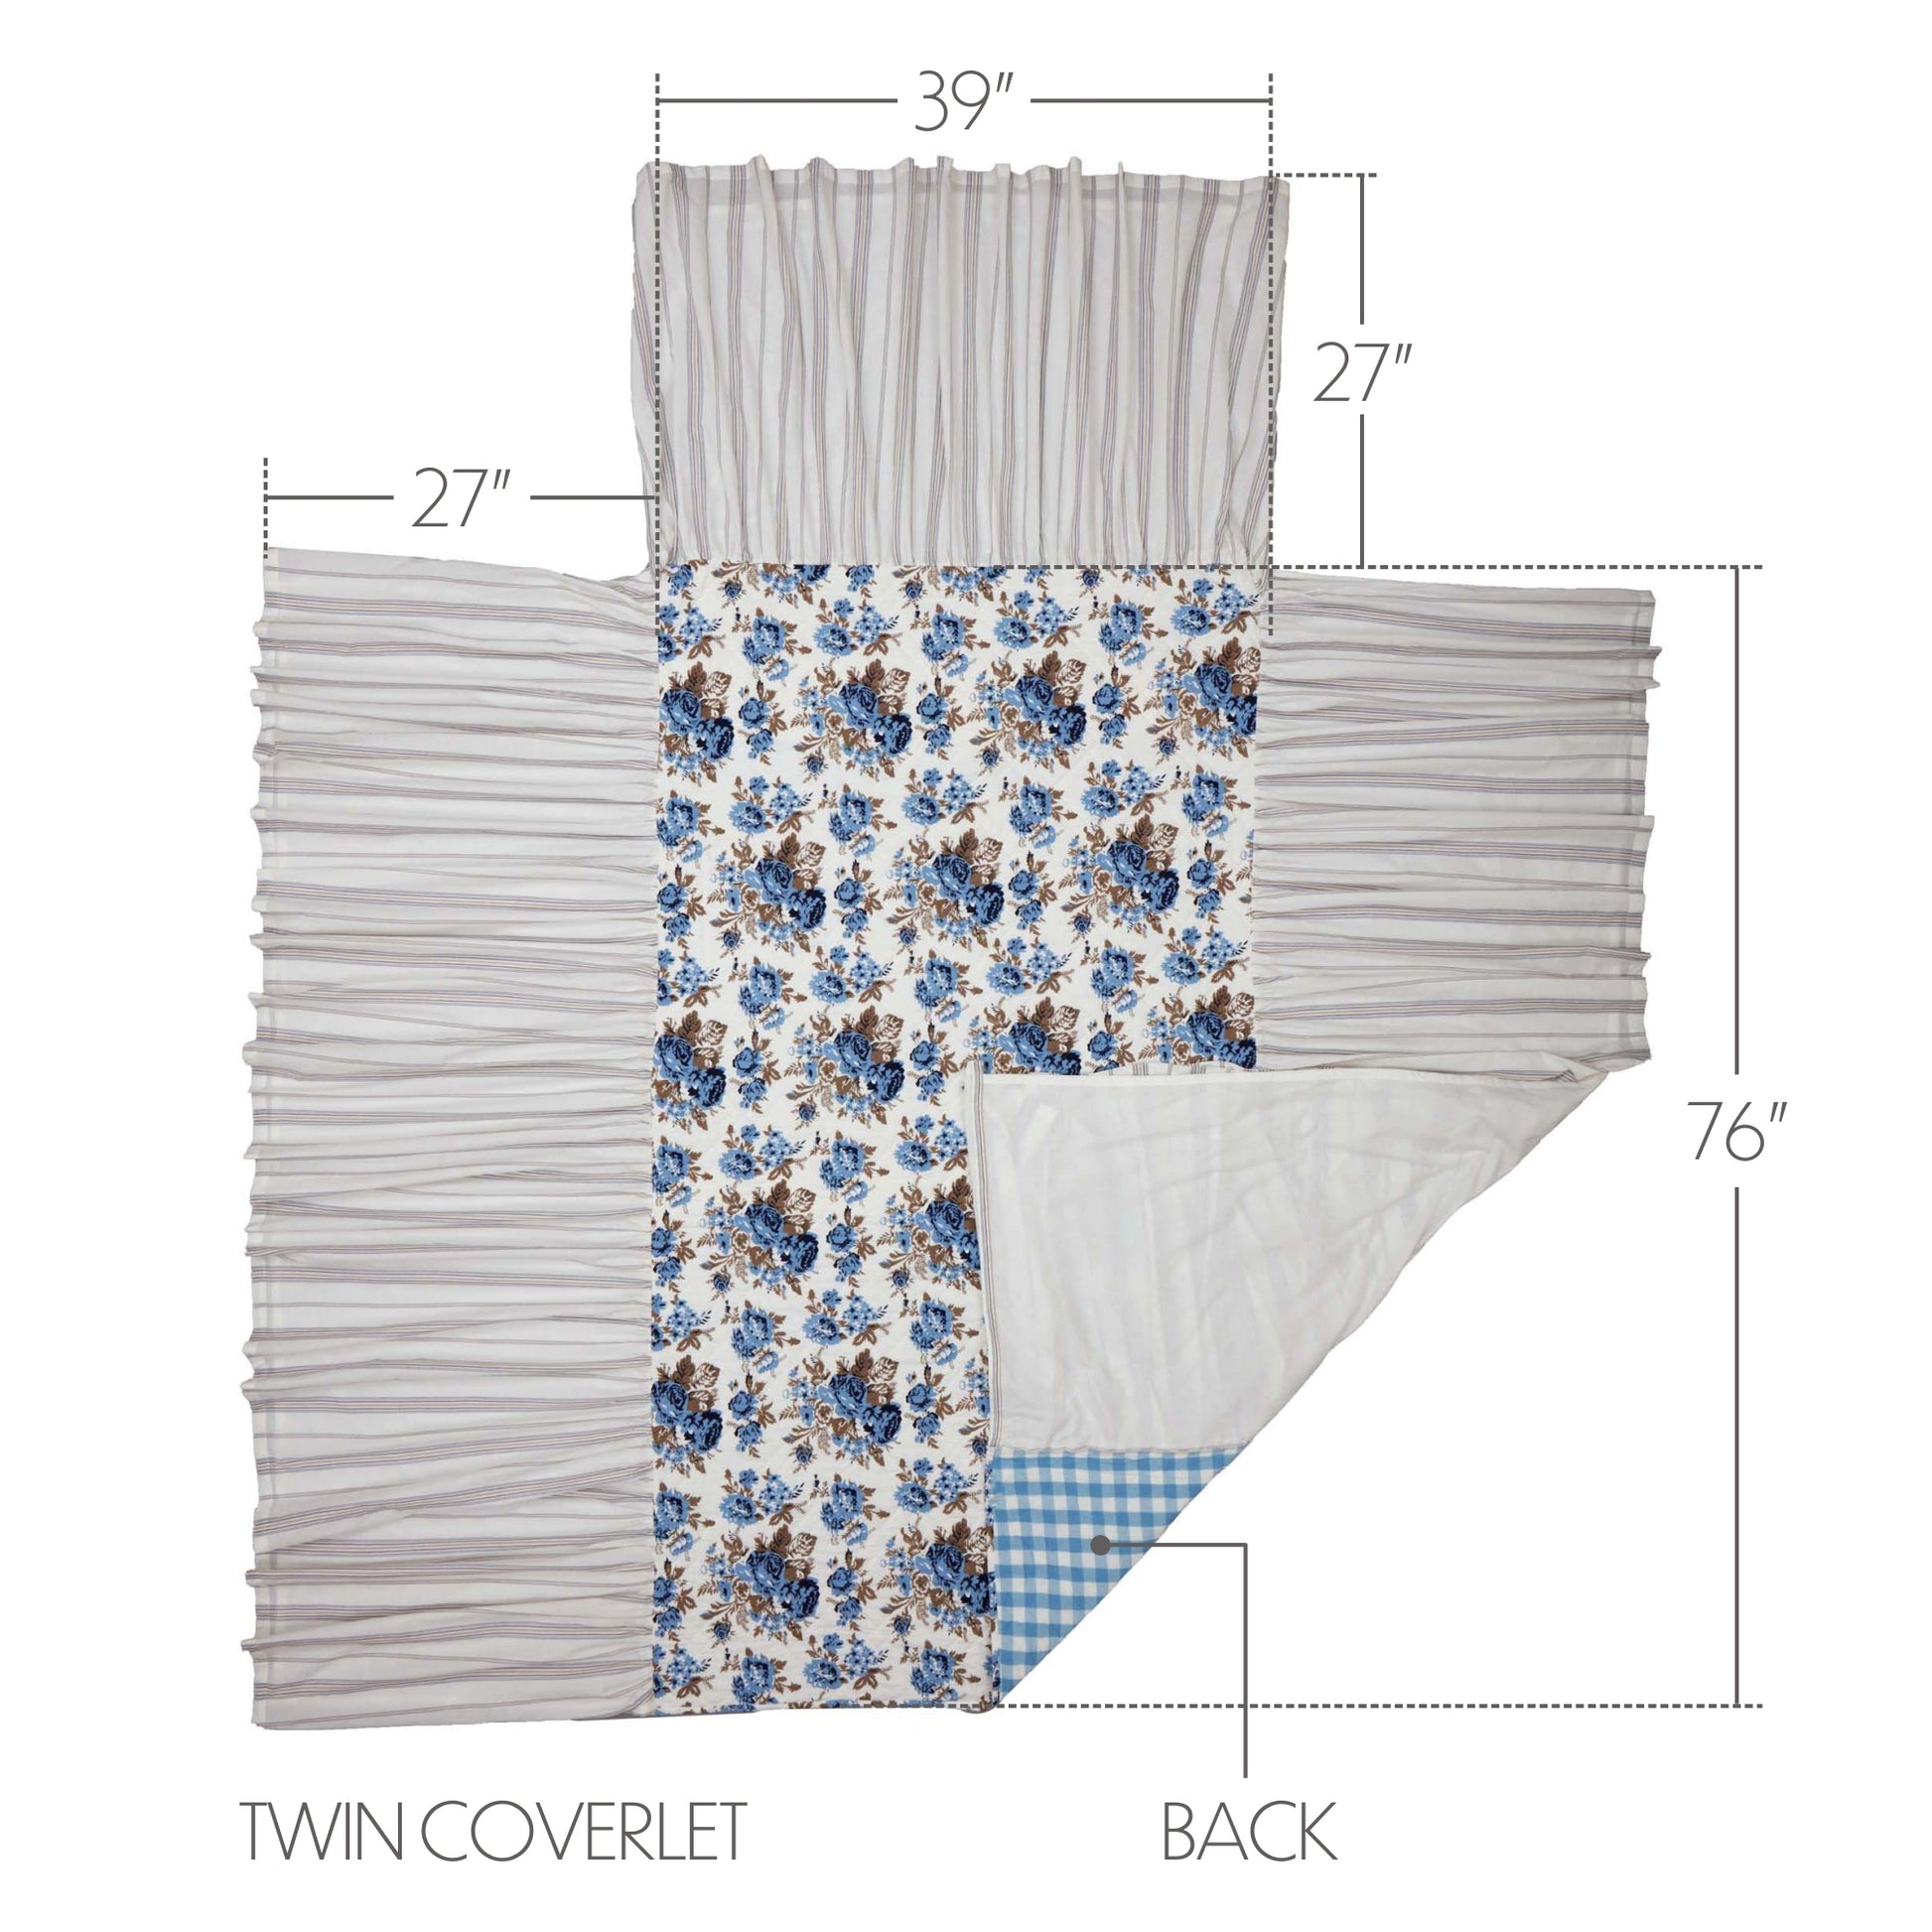 69996-Annie-Blue-Floral-Ruffled-Twin-Coverlet-76x39-27-image-9